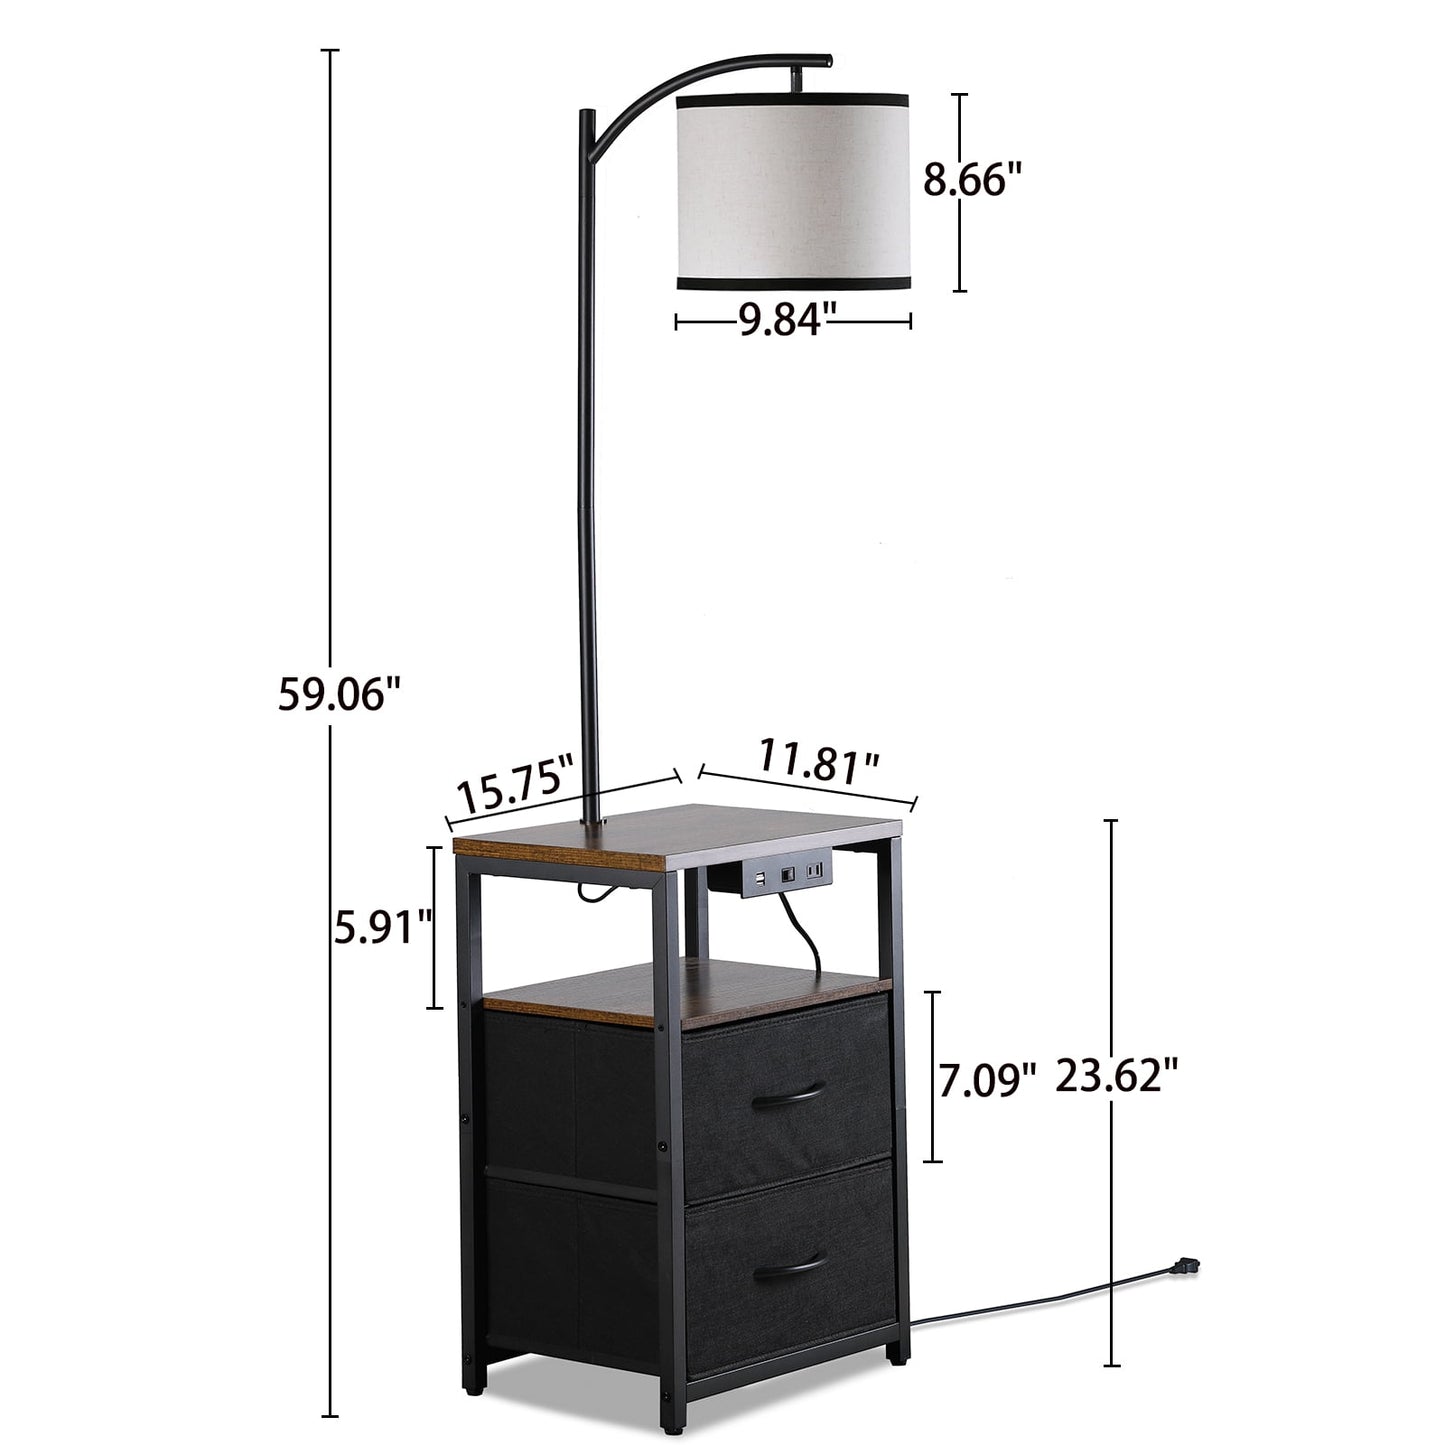 SUNMORY Floor Lamp with Table for Bedroom, Nightstand with Drawers Lamp with USB Port and Outlet Reading Light -Walnut